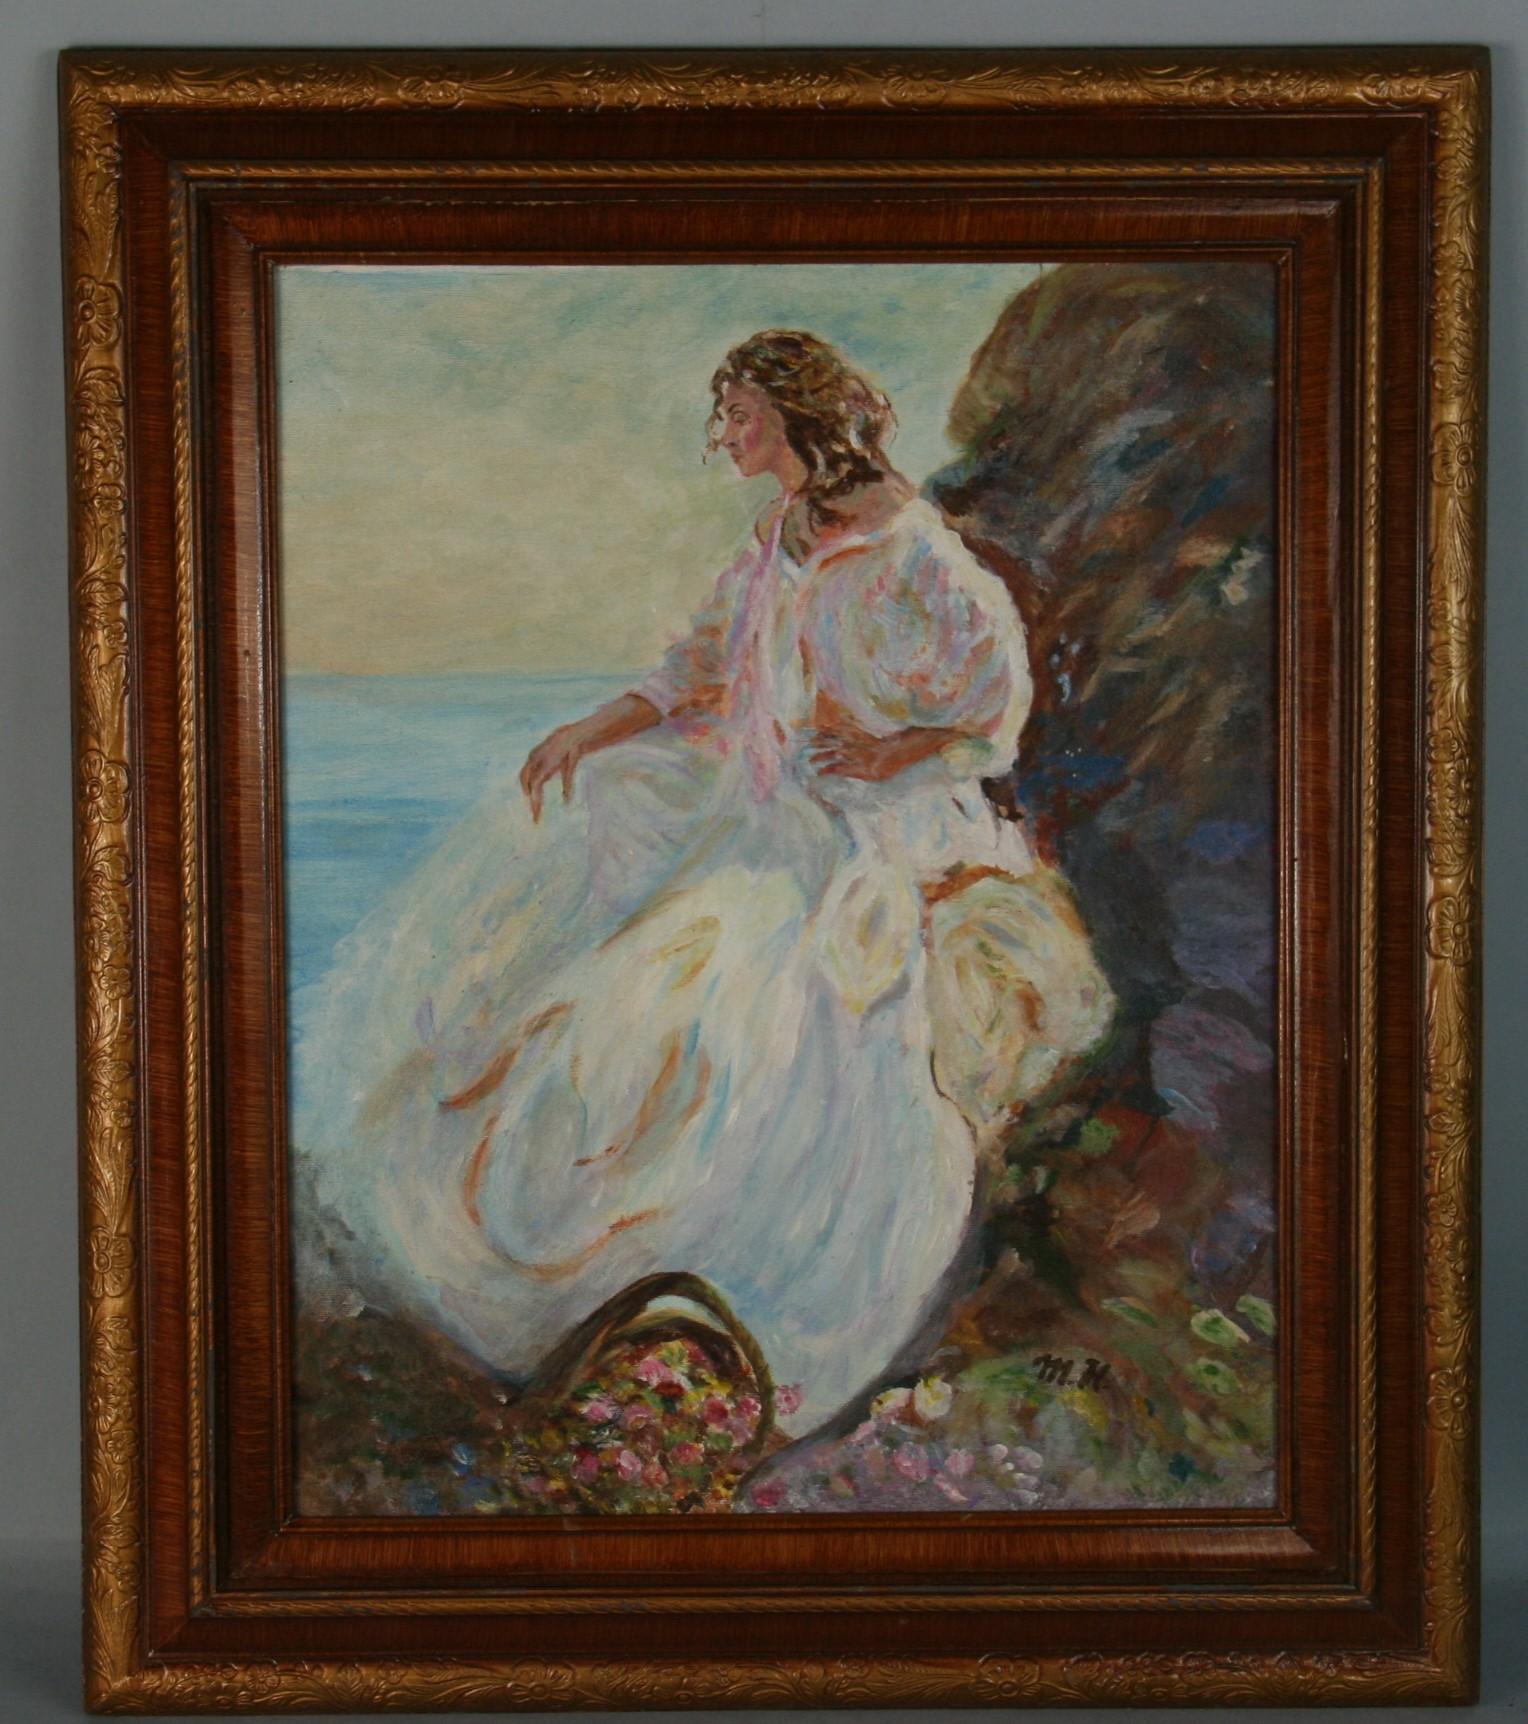 Unknown Figurative Painting - Elegant Female Portrait by the Sea